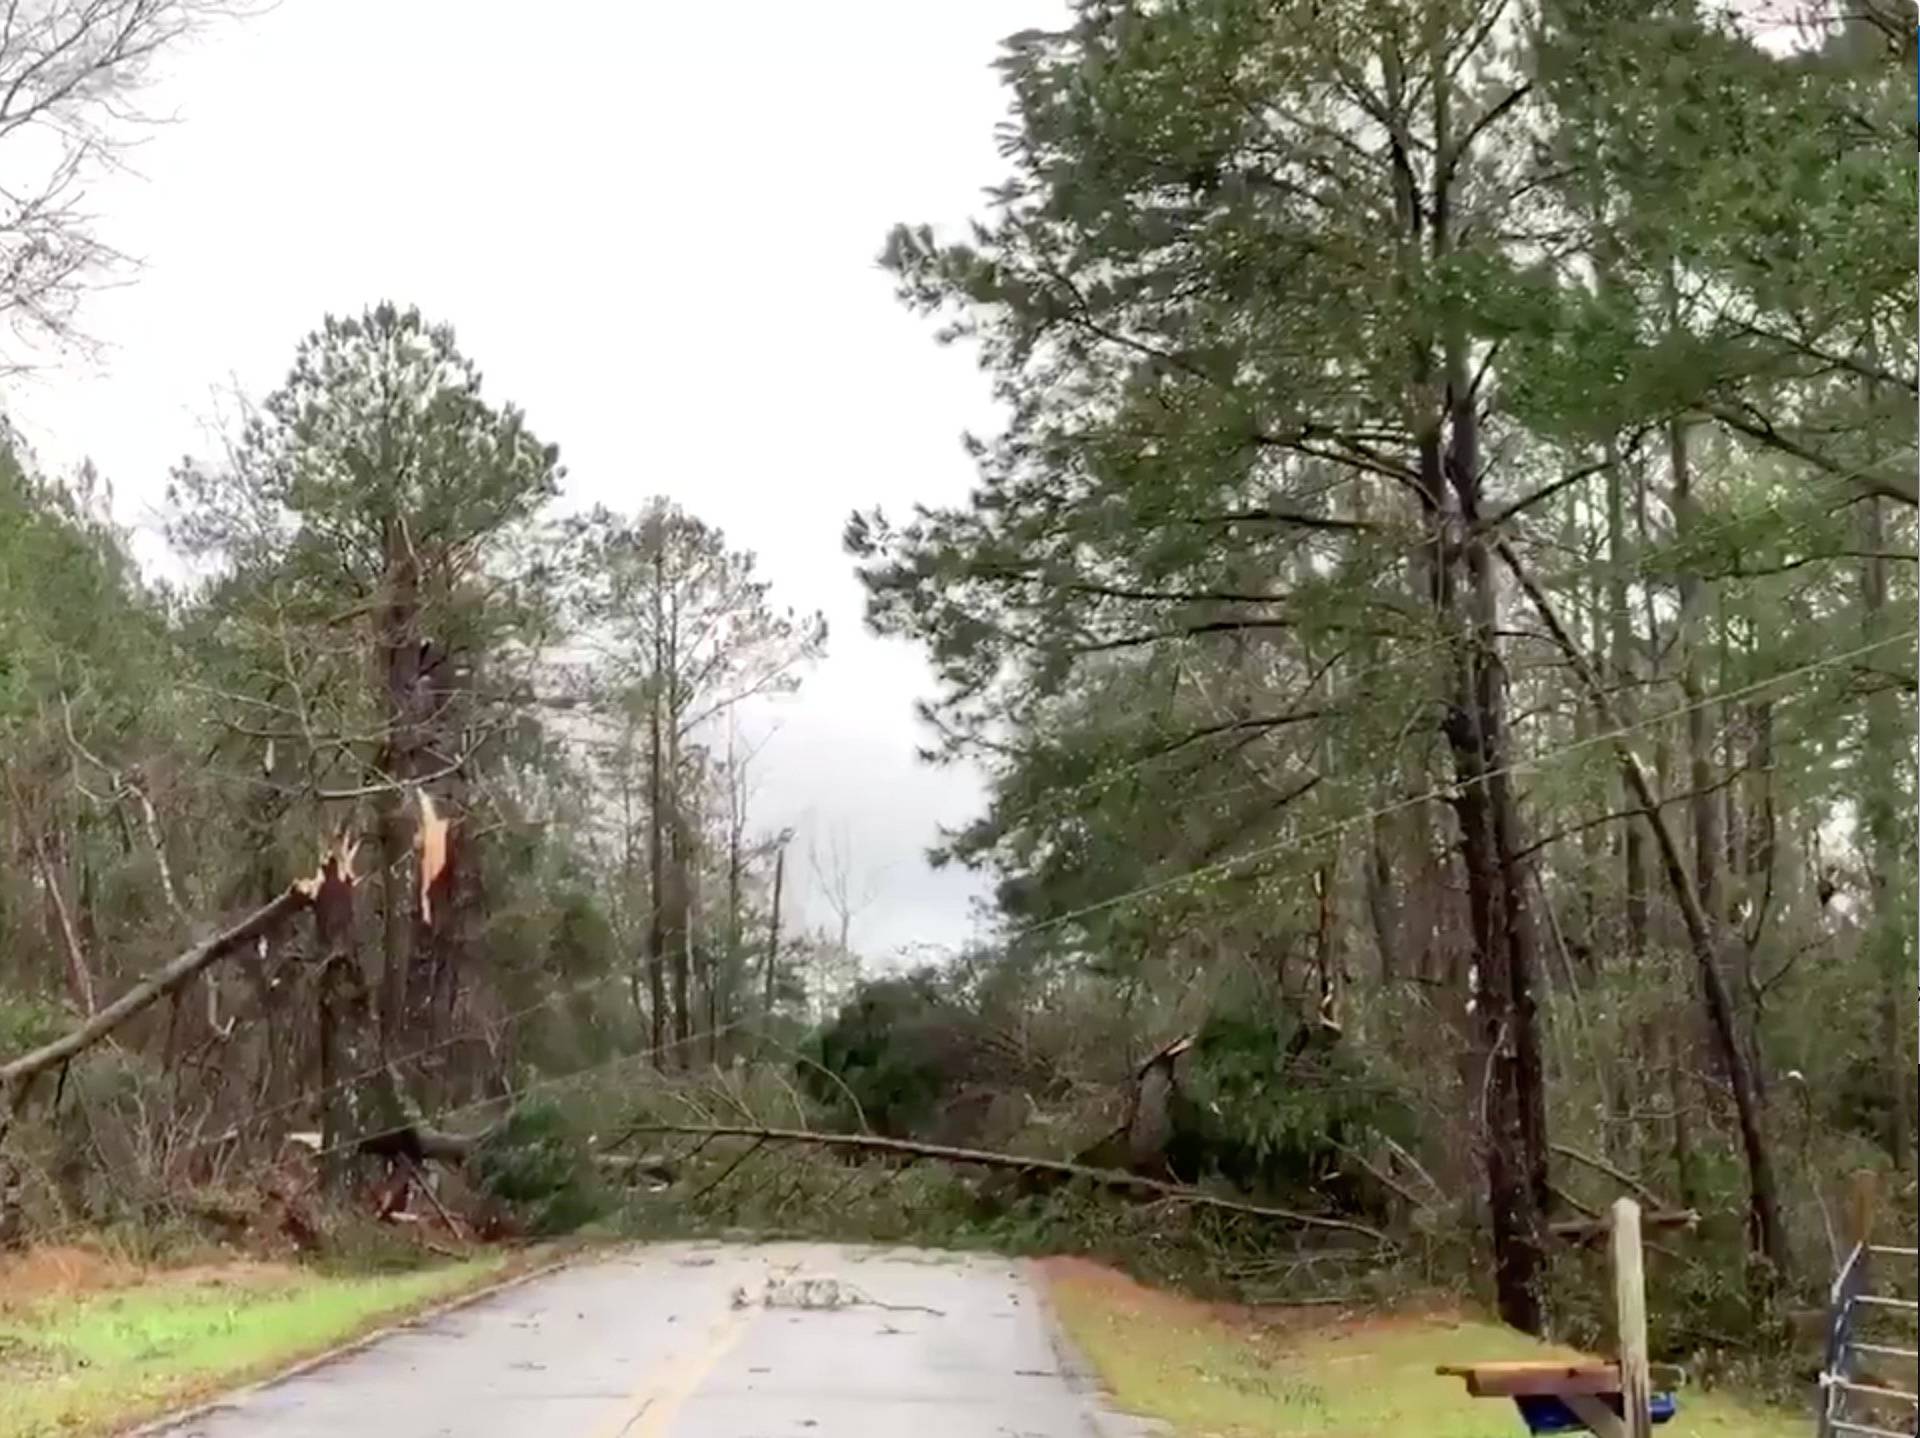 Fallen trees obstruct a road following a tornado in Beauregard, Alabama, U.S. in this March 3, 2019 still image obtained from social media video